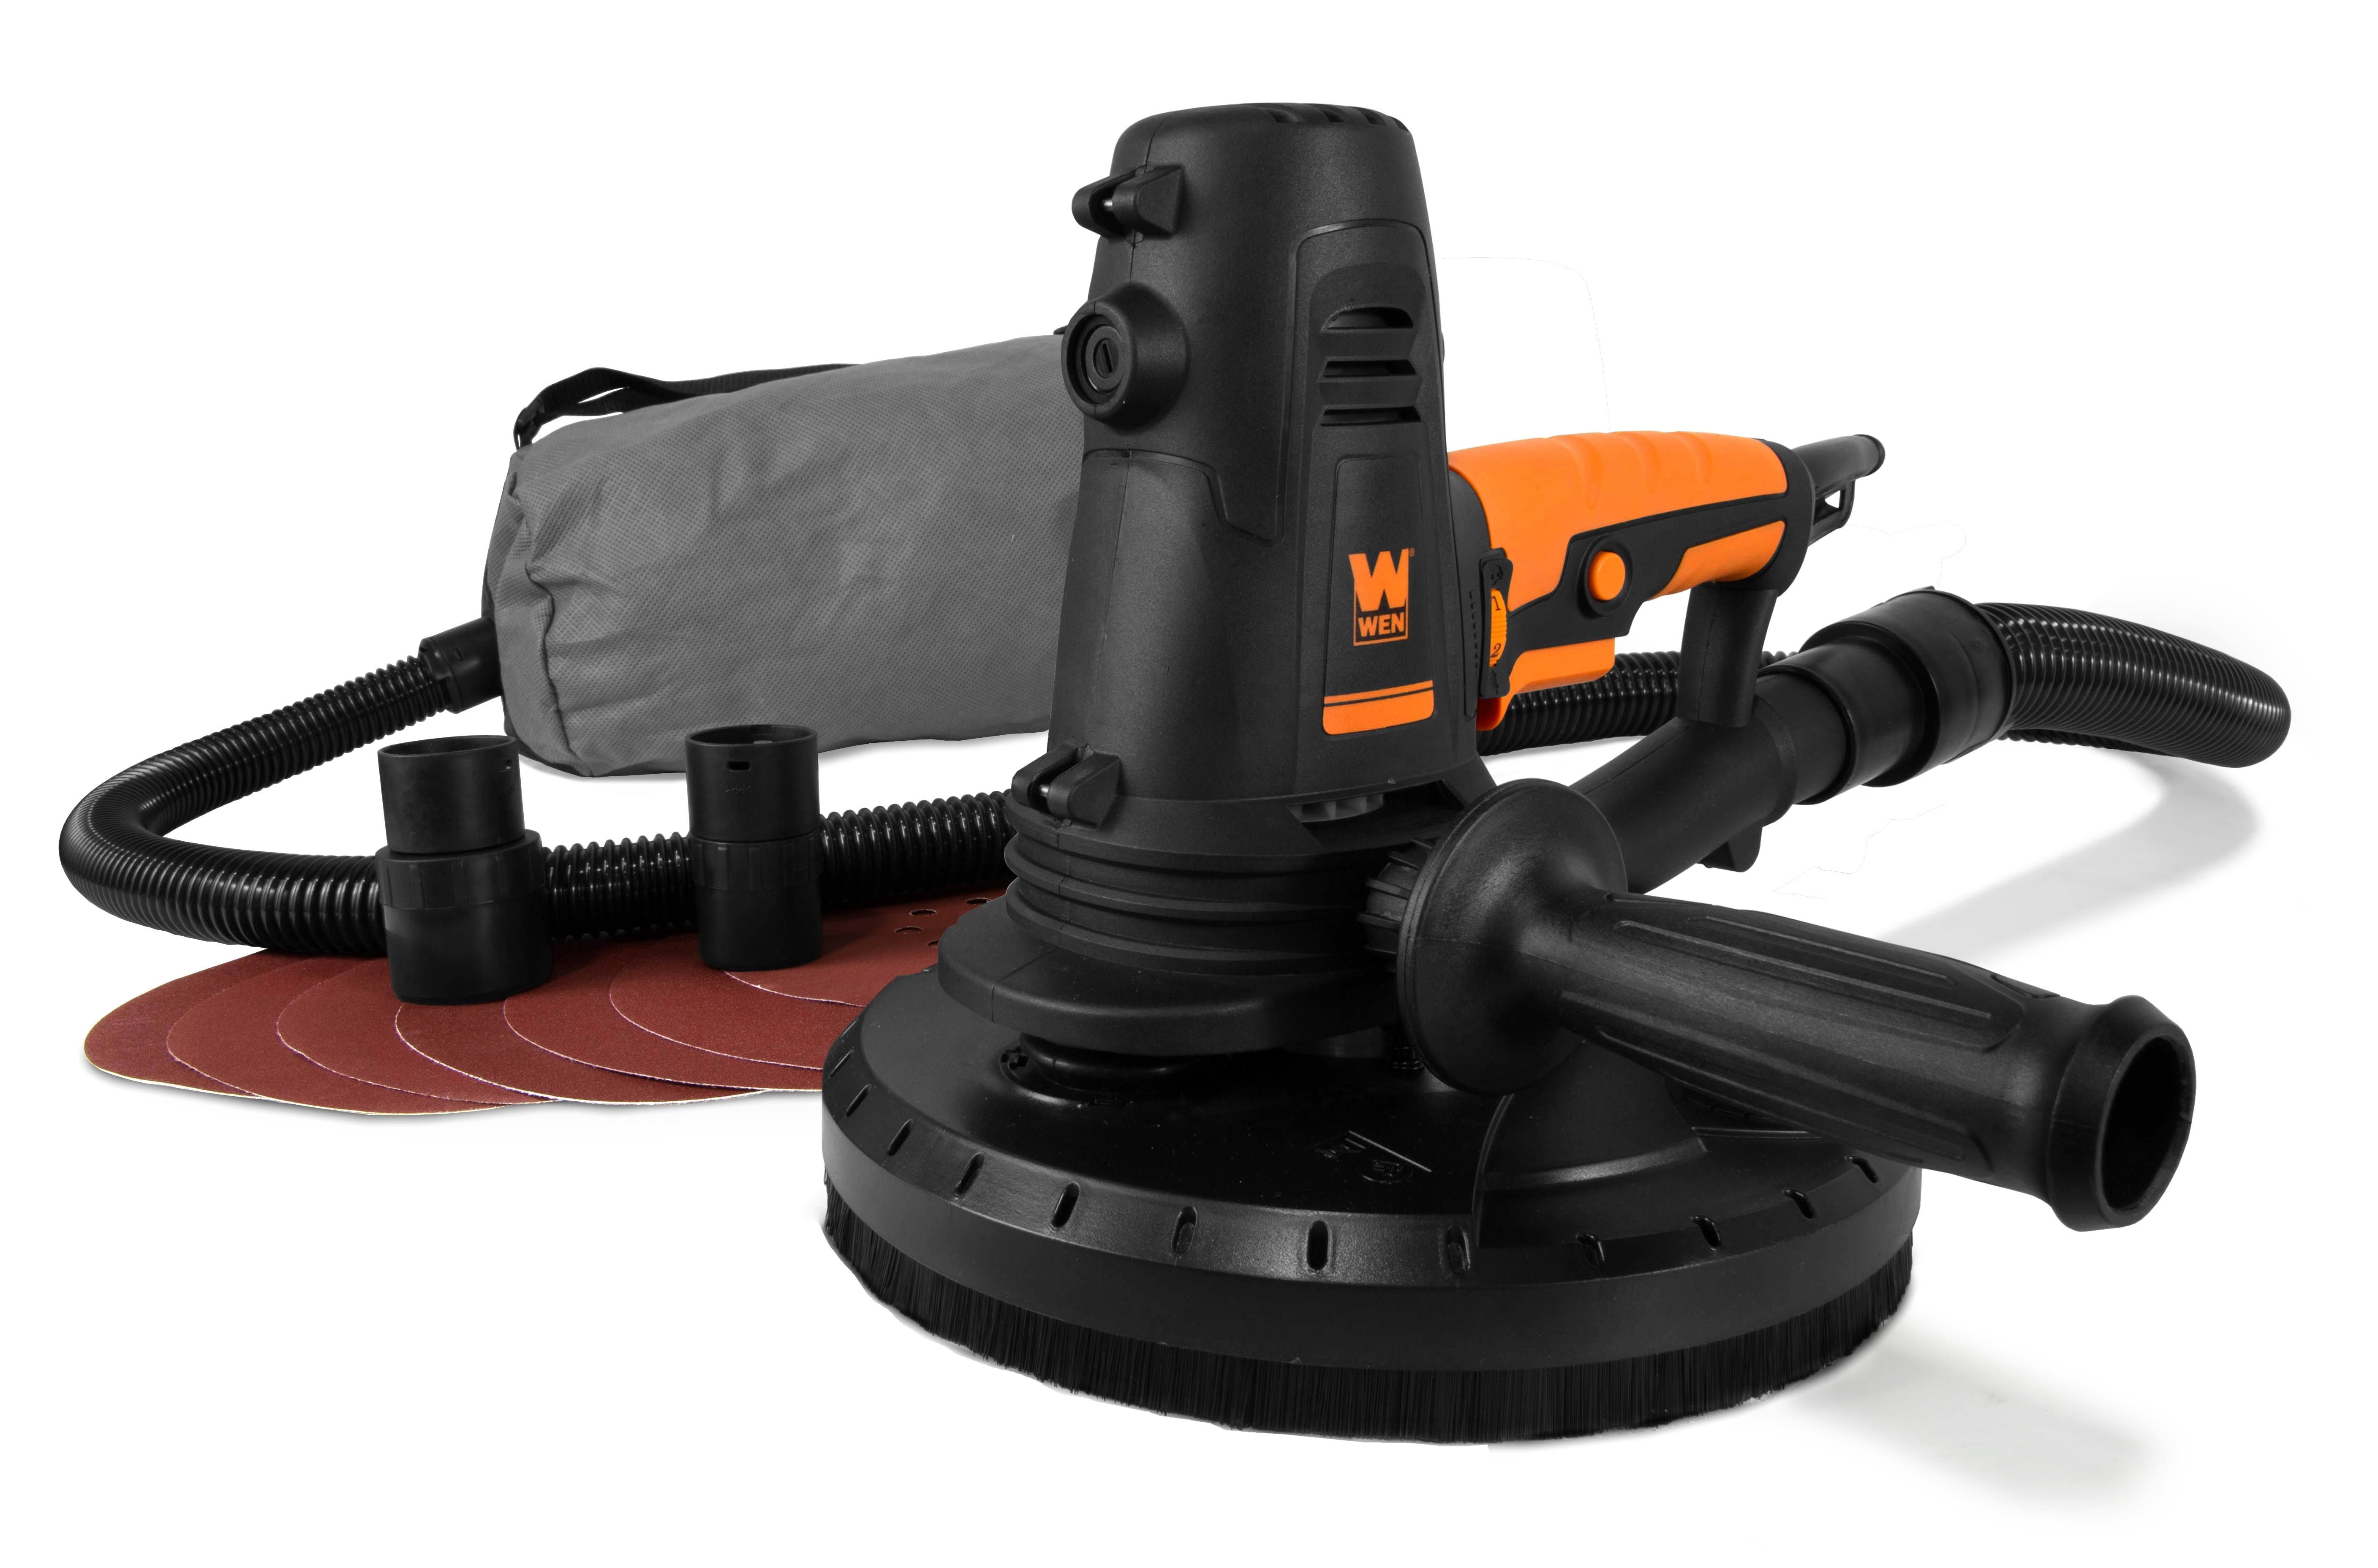 WEN Variable Speed Handheld Drywall Sander with Dust Hose and Collection Bag | Image